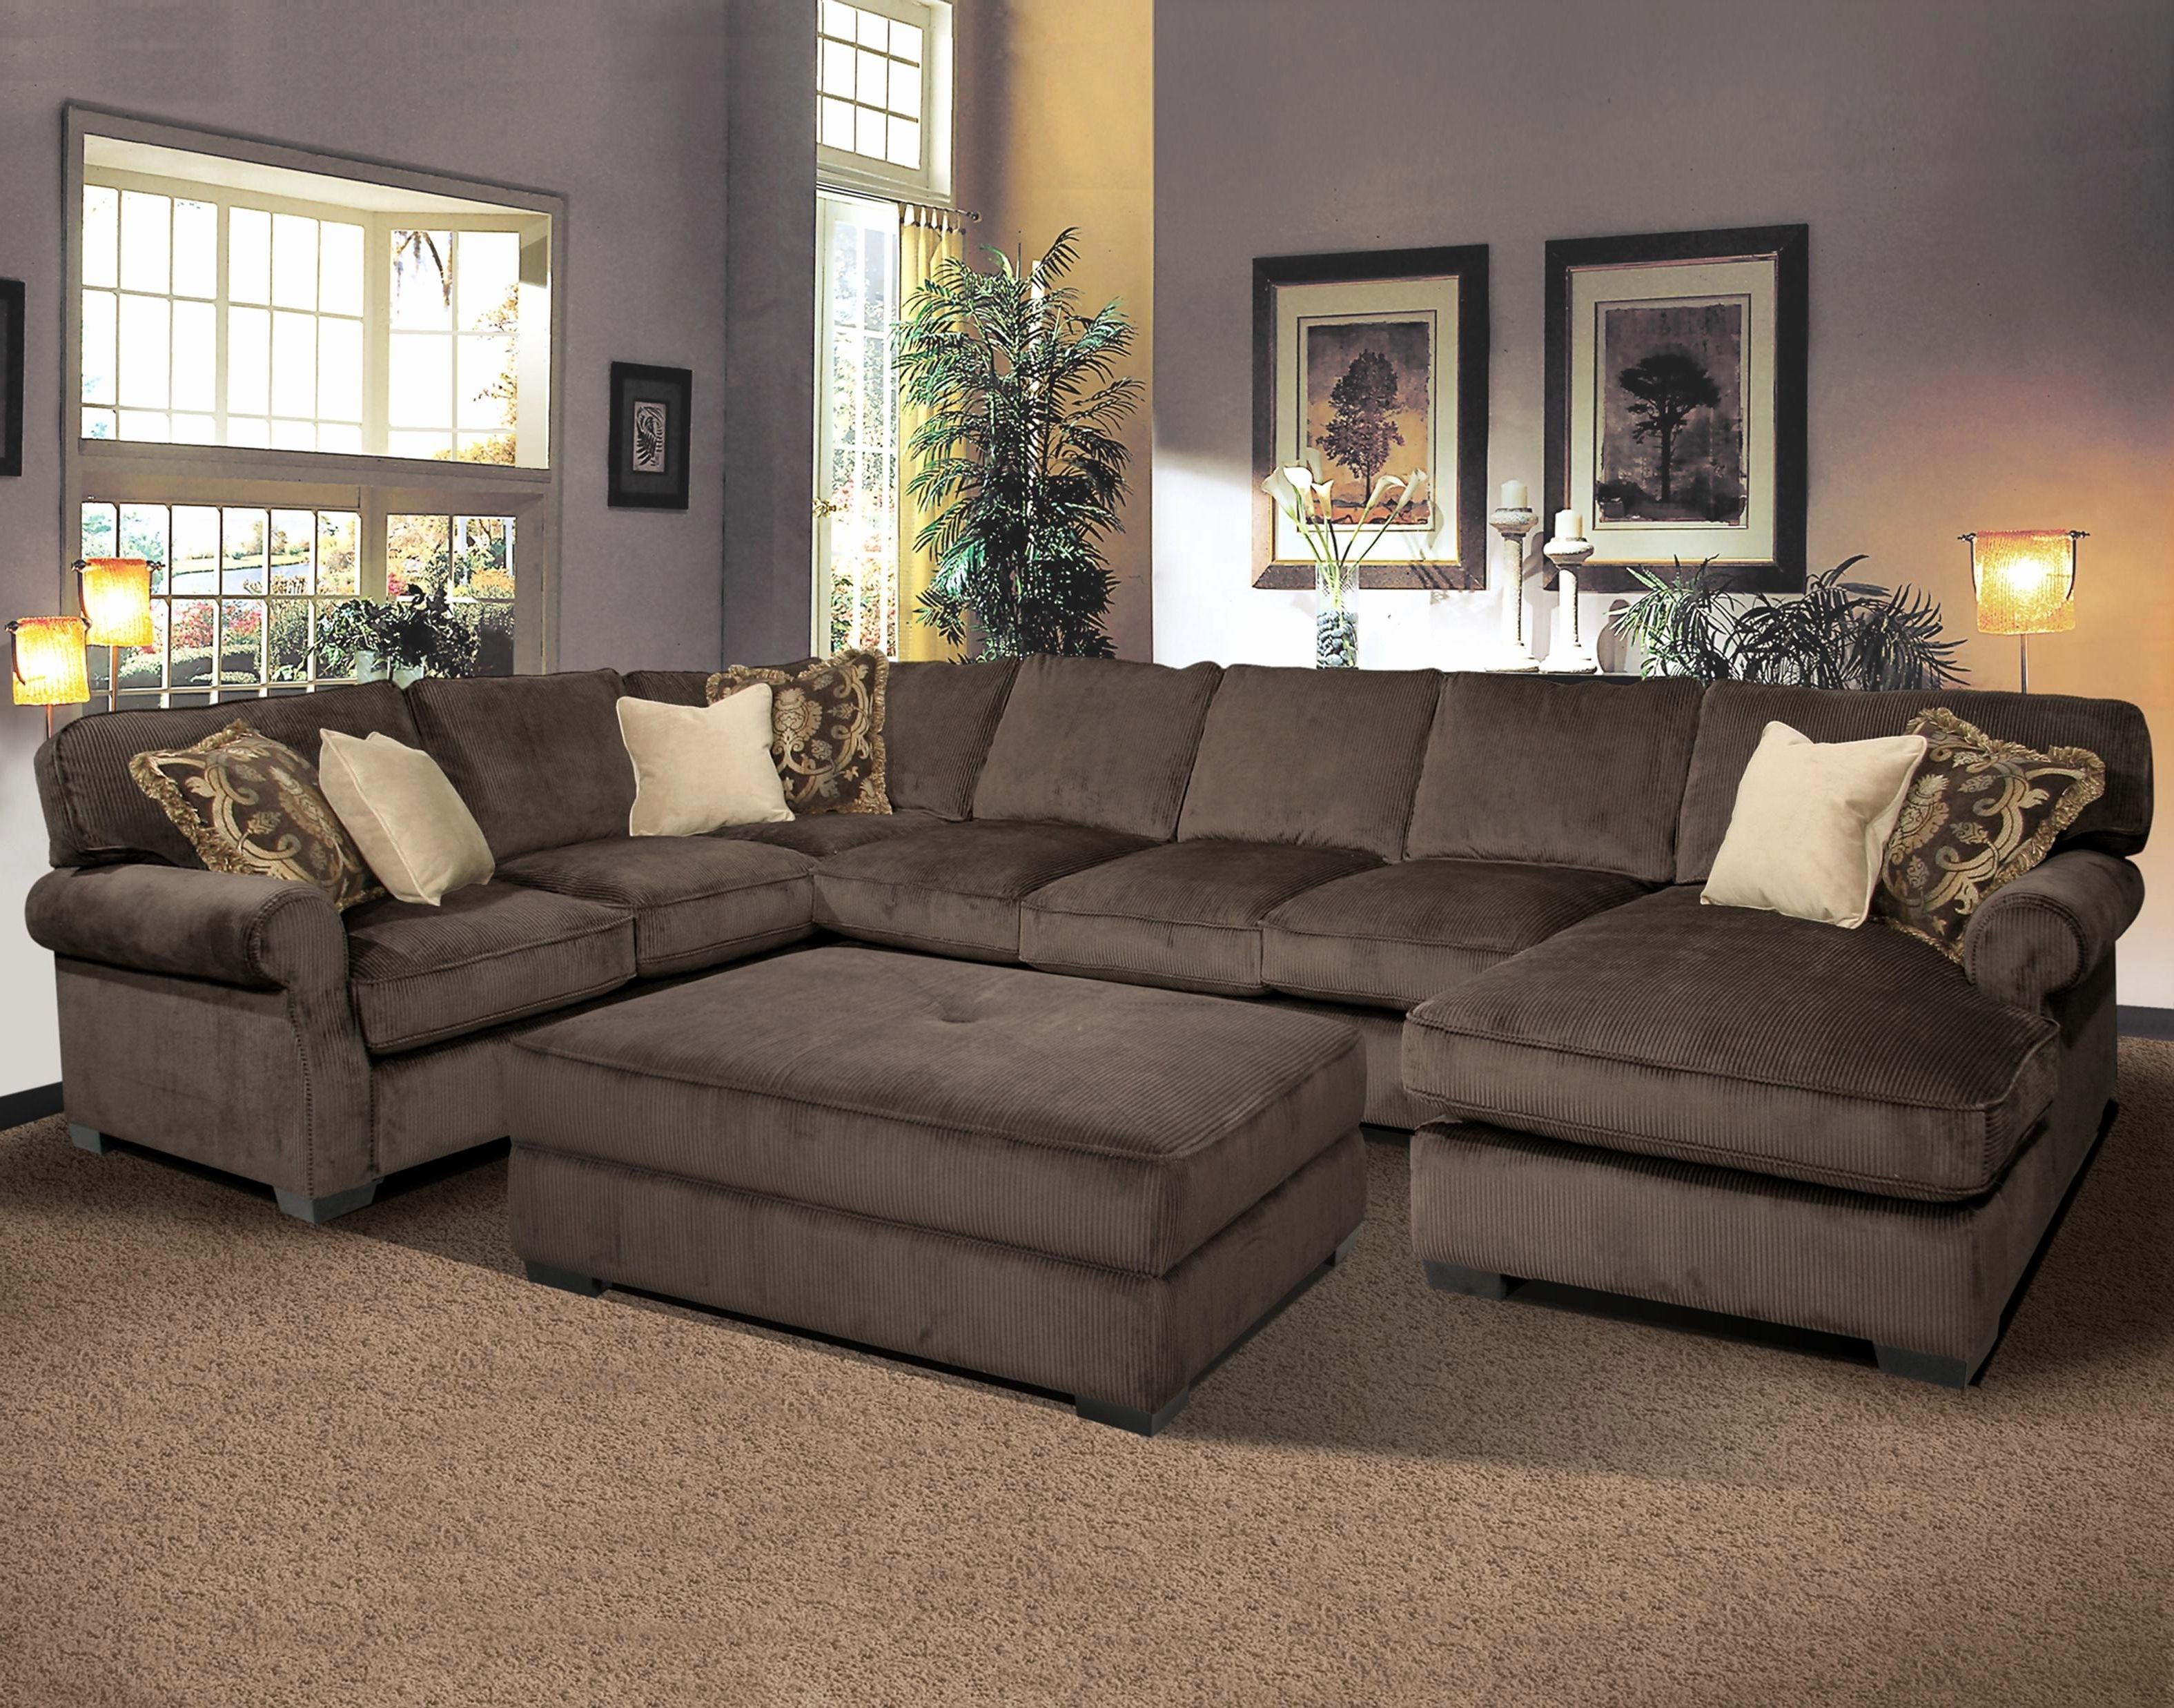 Unique Deep Sectional Couches 2018 Couches And Sofas Ideas Inside Most Recently Released Deep Sectional Sofas With Chaise 